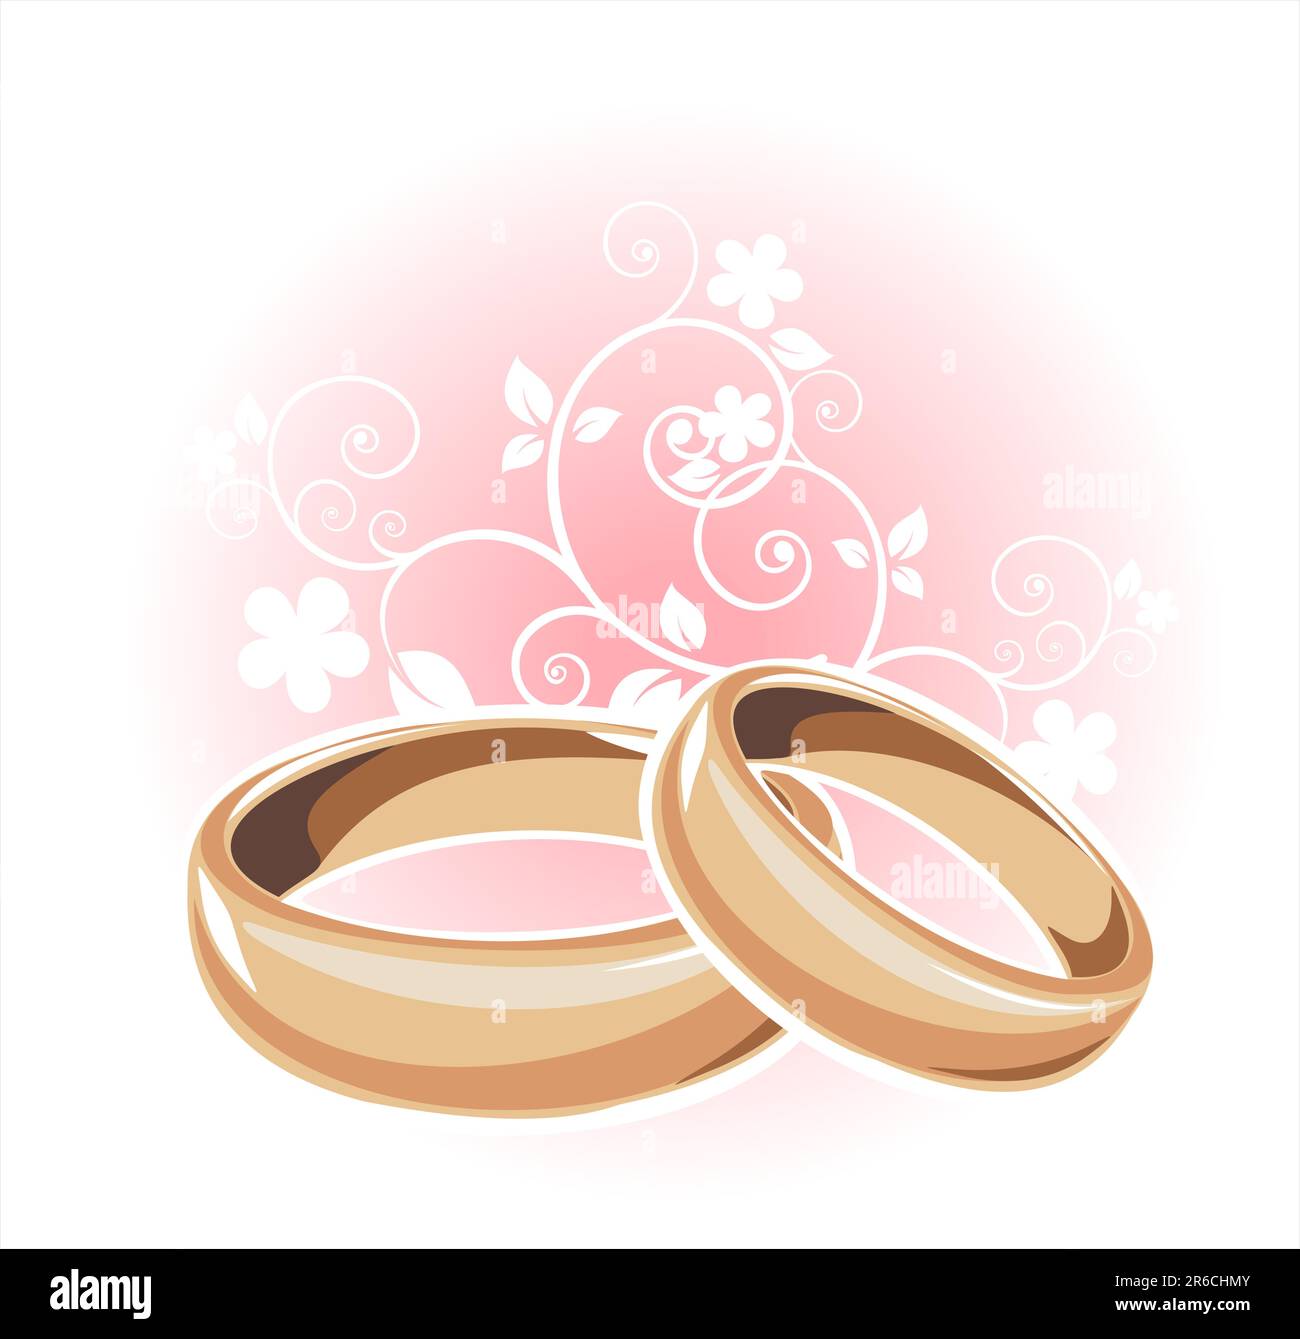 Gold wedding rings and floral pattern on a white background. Stock Vector